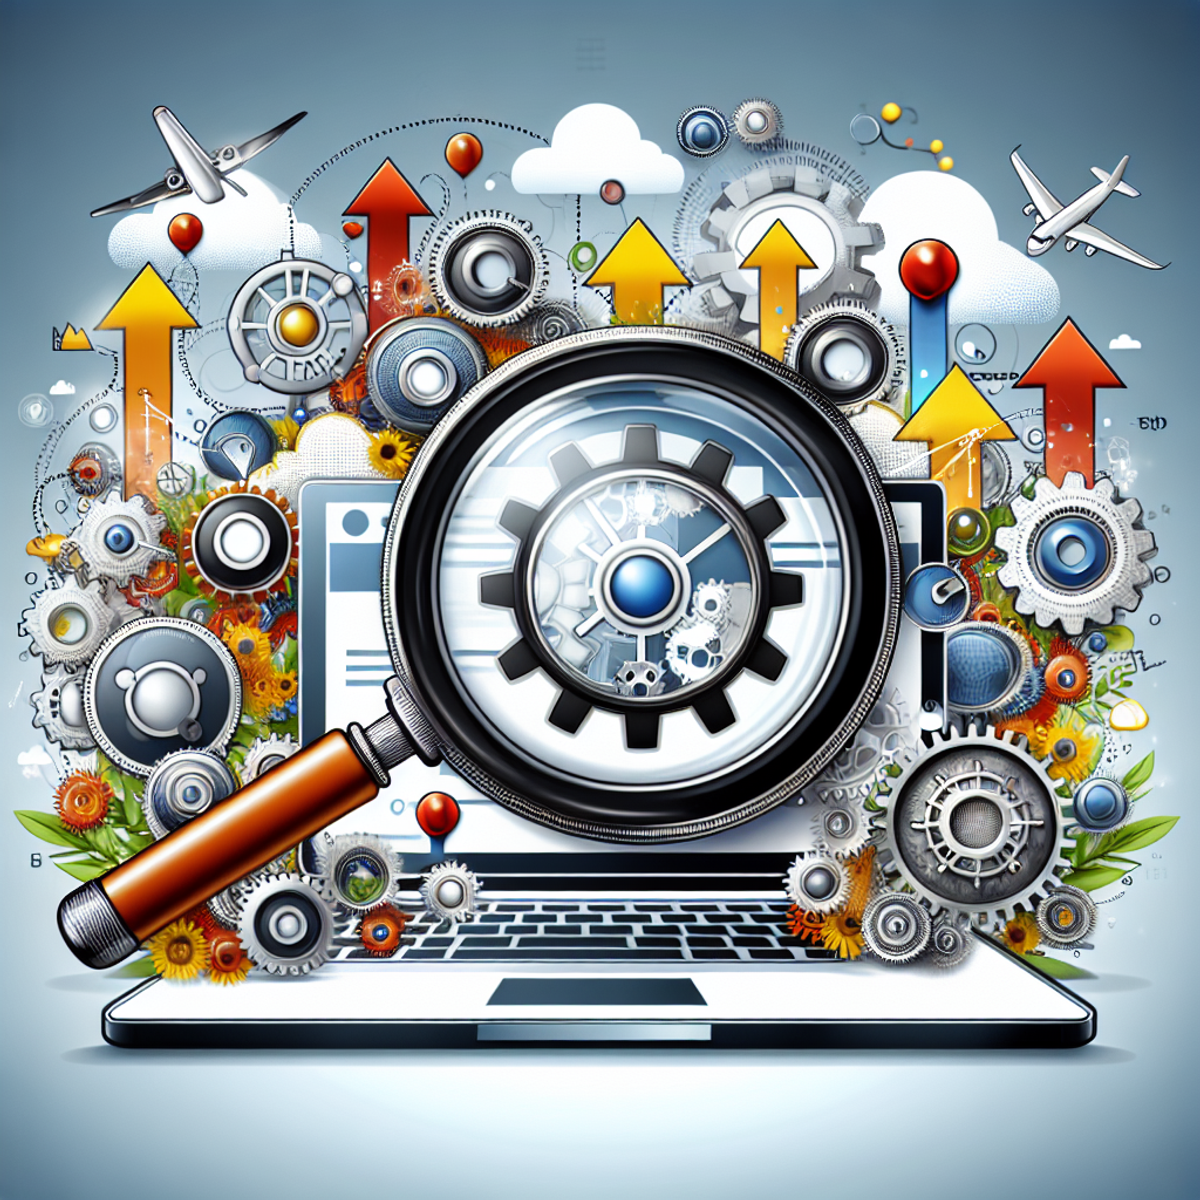 A large magnifying glass hovers over a computer screen displaying a symbolic website, surrounded by floating gears and cogs. Arrows indicate upward movement, representing web positioning.